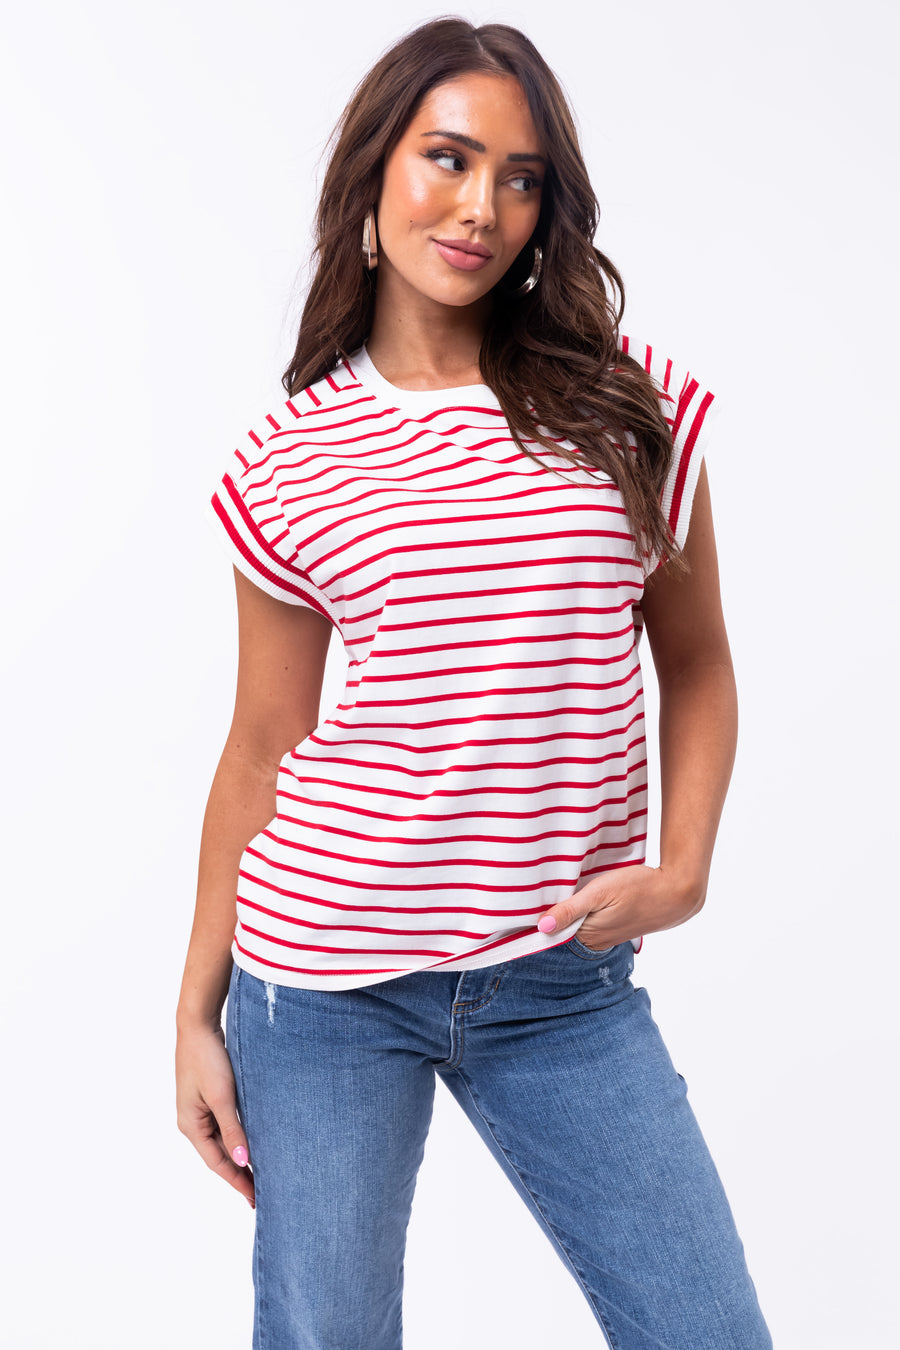 Flying Tomato Cherry Striped Cap Sleeve Top